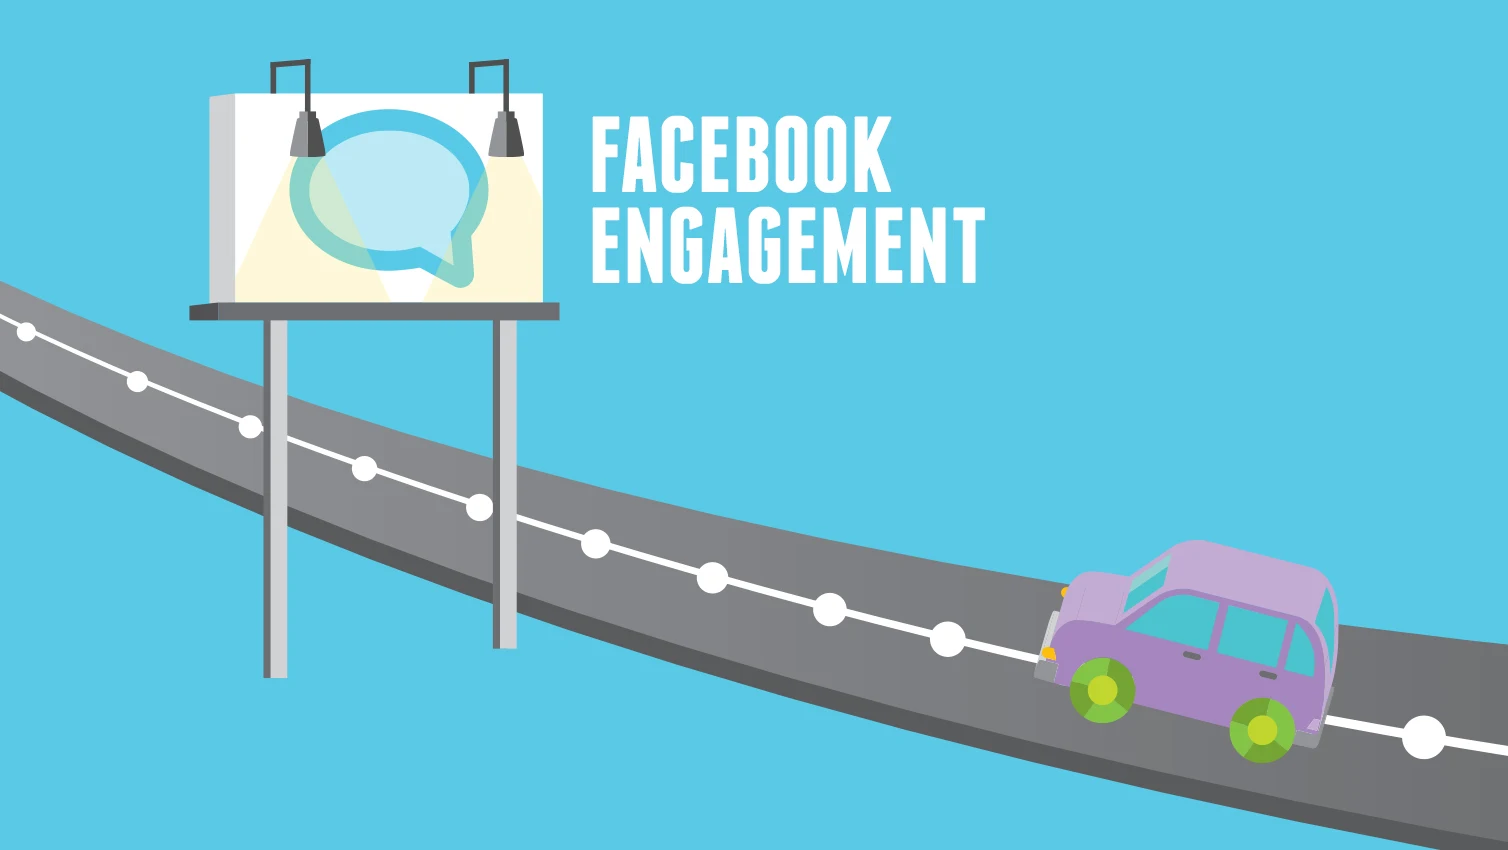 New Research: Facebook Benchmark Data from 2+ Million Posts